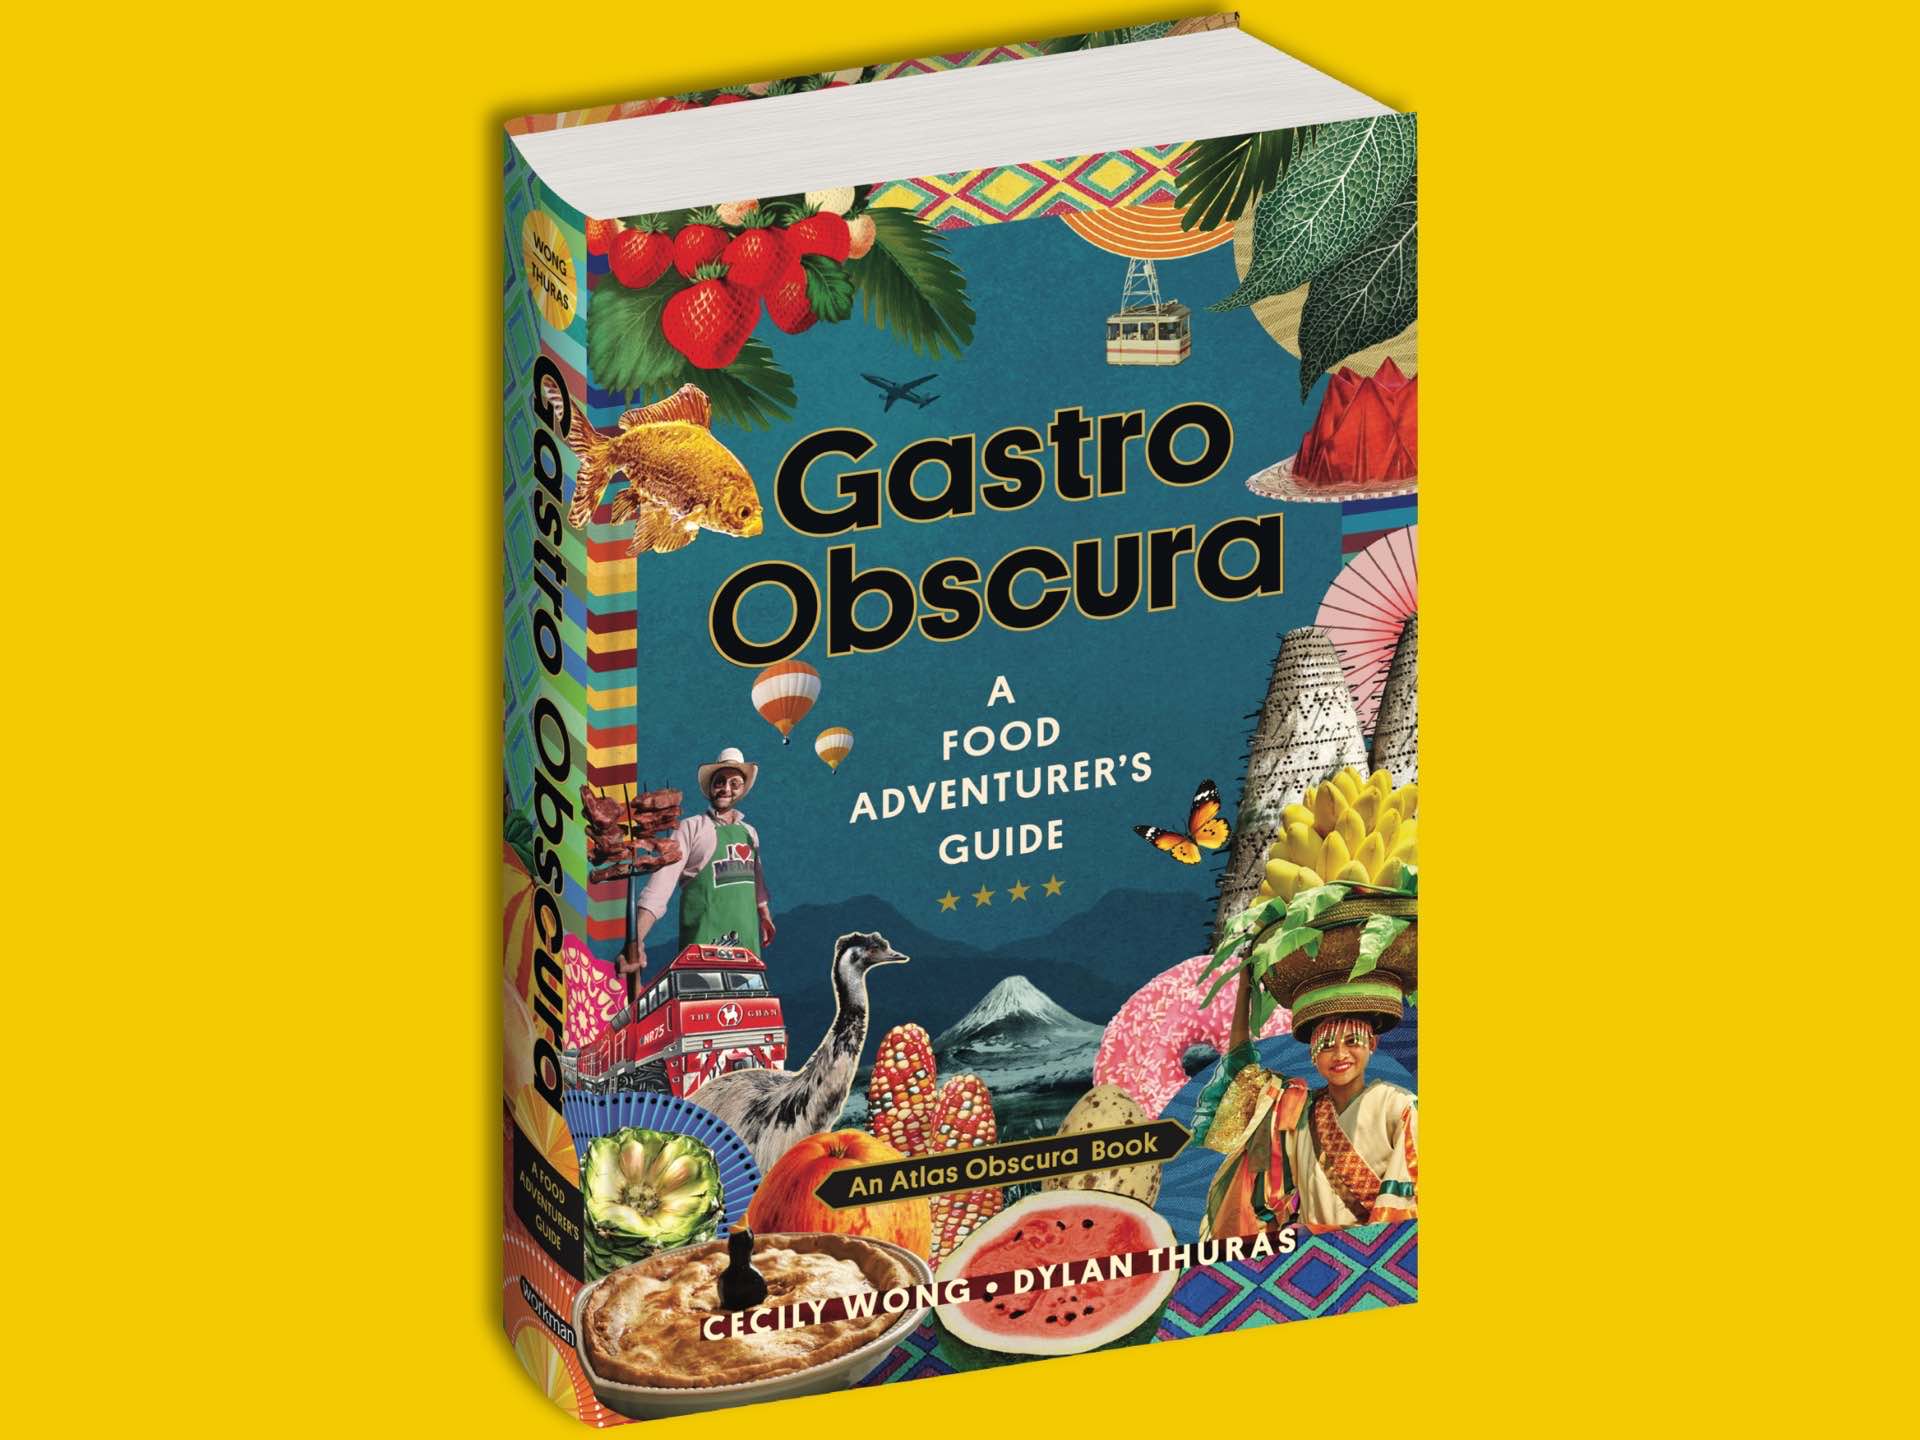 Gastro Obscura by Cecily Wong & Dylan Thuras. ($26 hardcover)